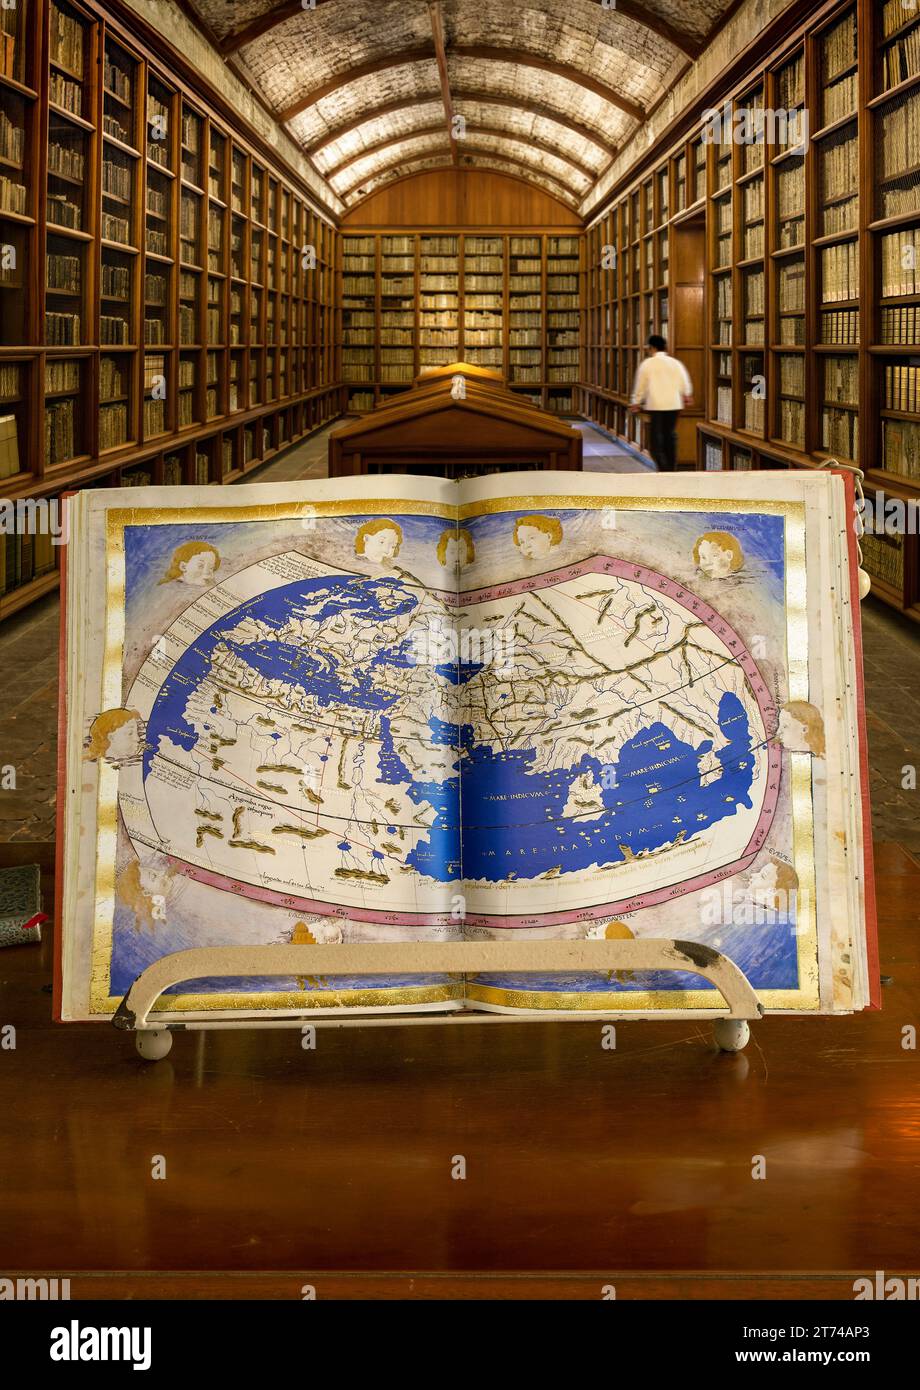 Ptolemy's world map, made by Nicolaus Germanus ca. 1470. Is part of the Manuscript codex of Ptolemy's Geography. Codex Urbinas Latinus 274. Stock Photo